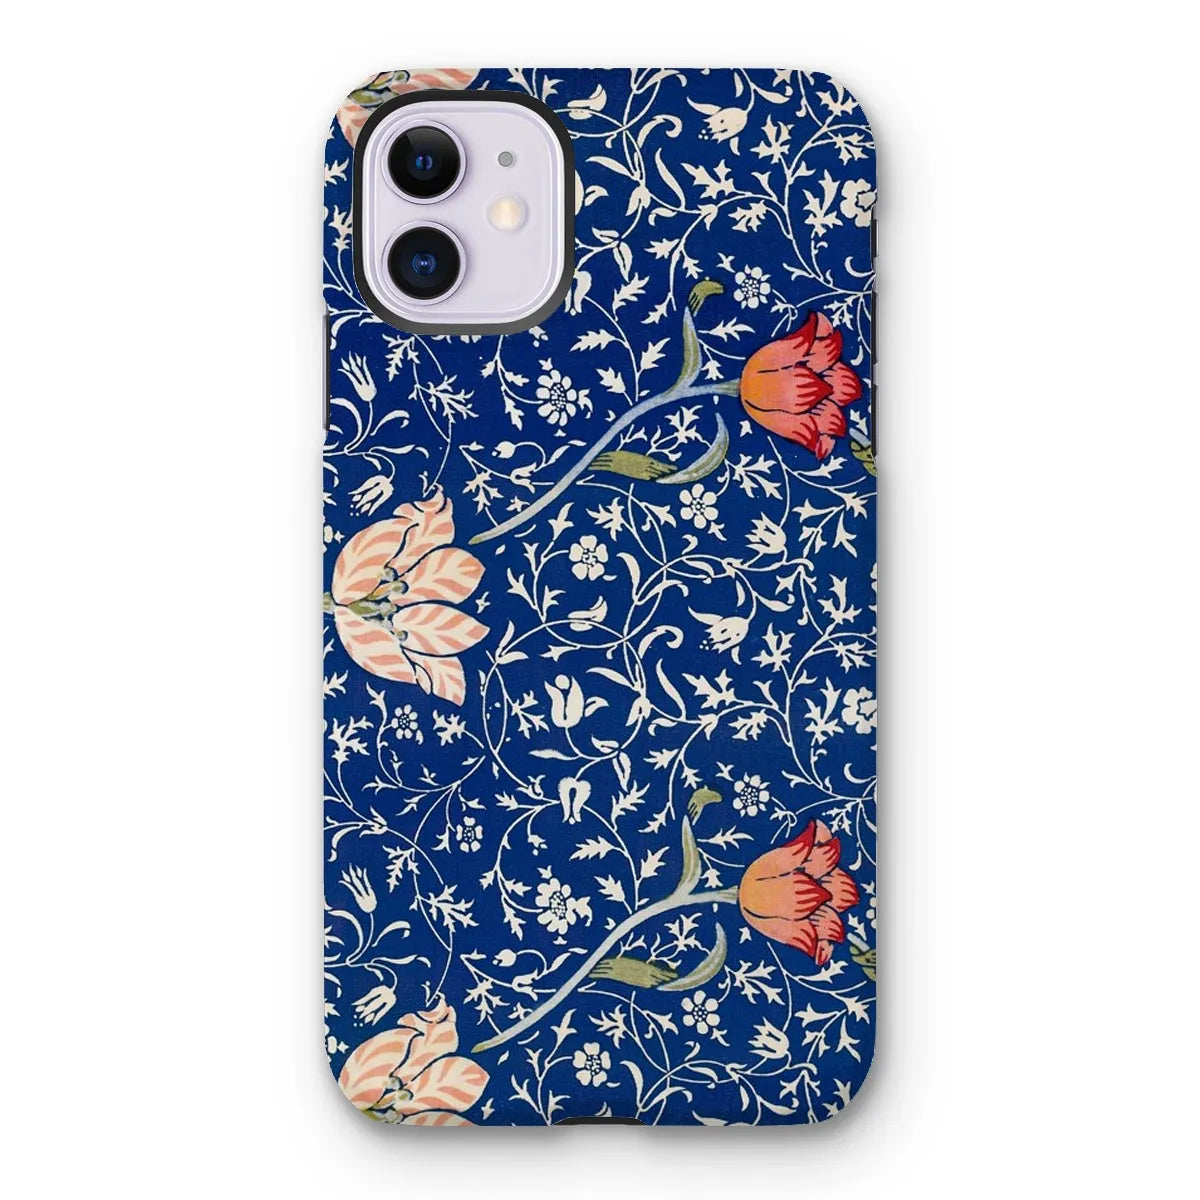 Medway - Floral Aesthetic Art Phone Case - William Morris - Iphone 11 / Matte - Mobile Phone Cases - Aesthetic Art